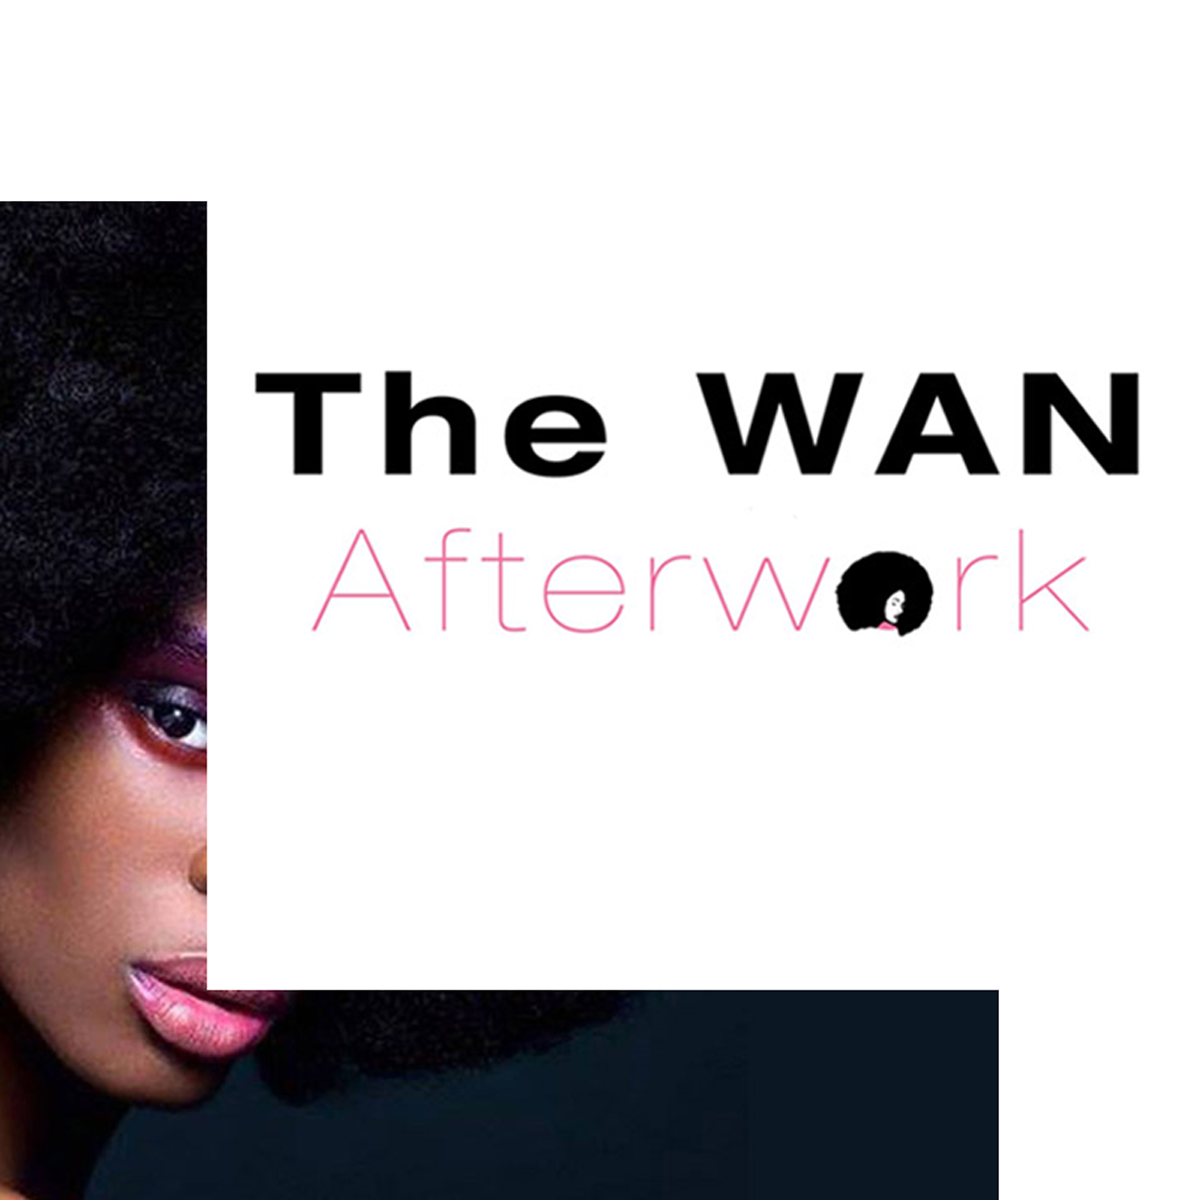 The Women of the afropolitan network